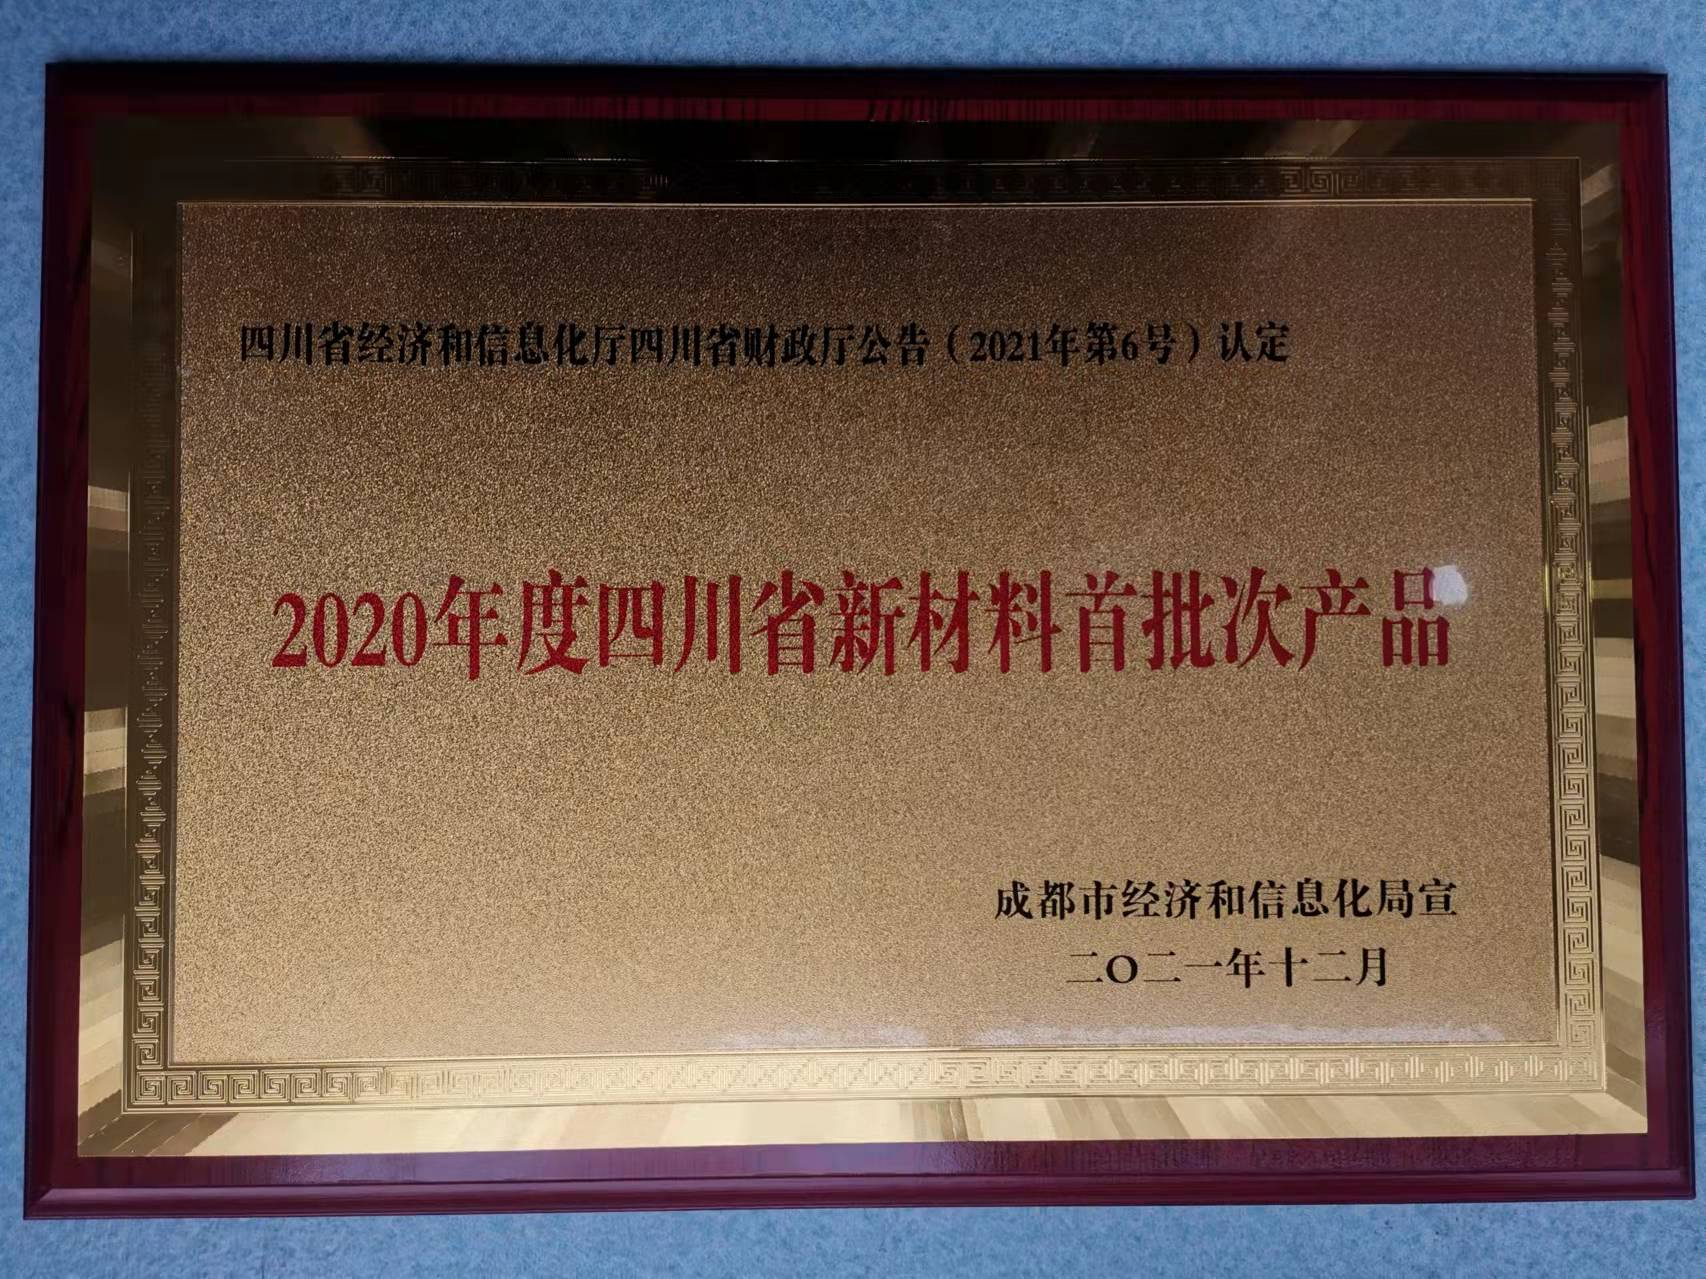 Warm congratulations to the company for identifying "the first batch of new materials in Sichuan Province in 2020"